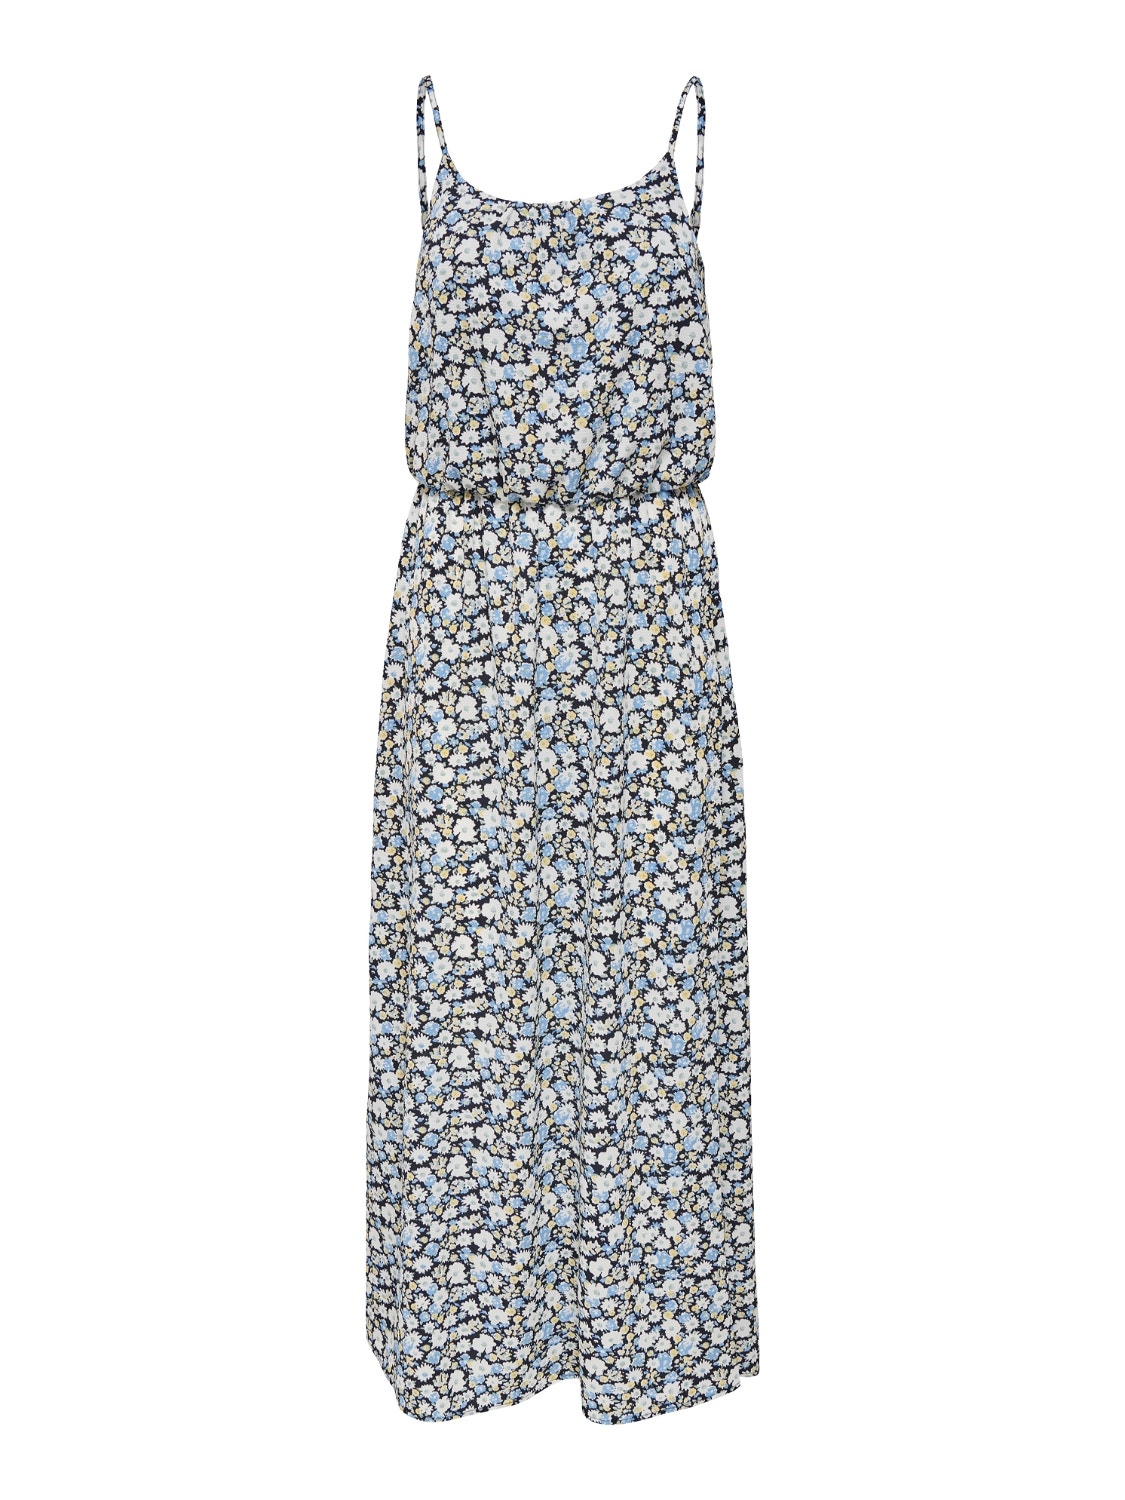 ONLY Maxi dress with pattern -Night Sky - 15177381